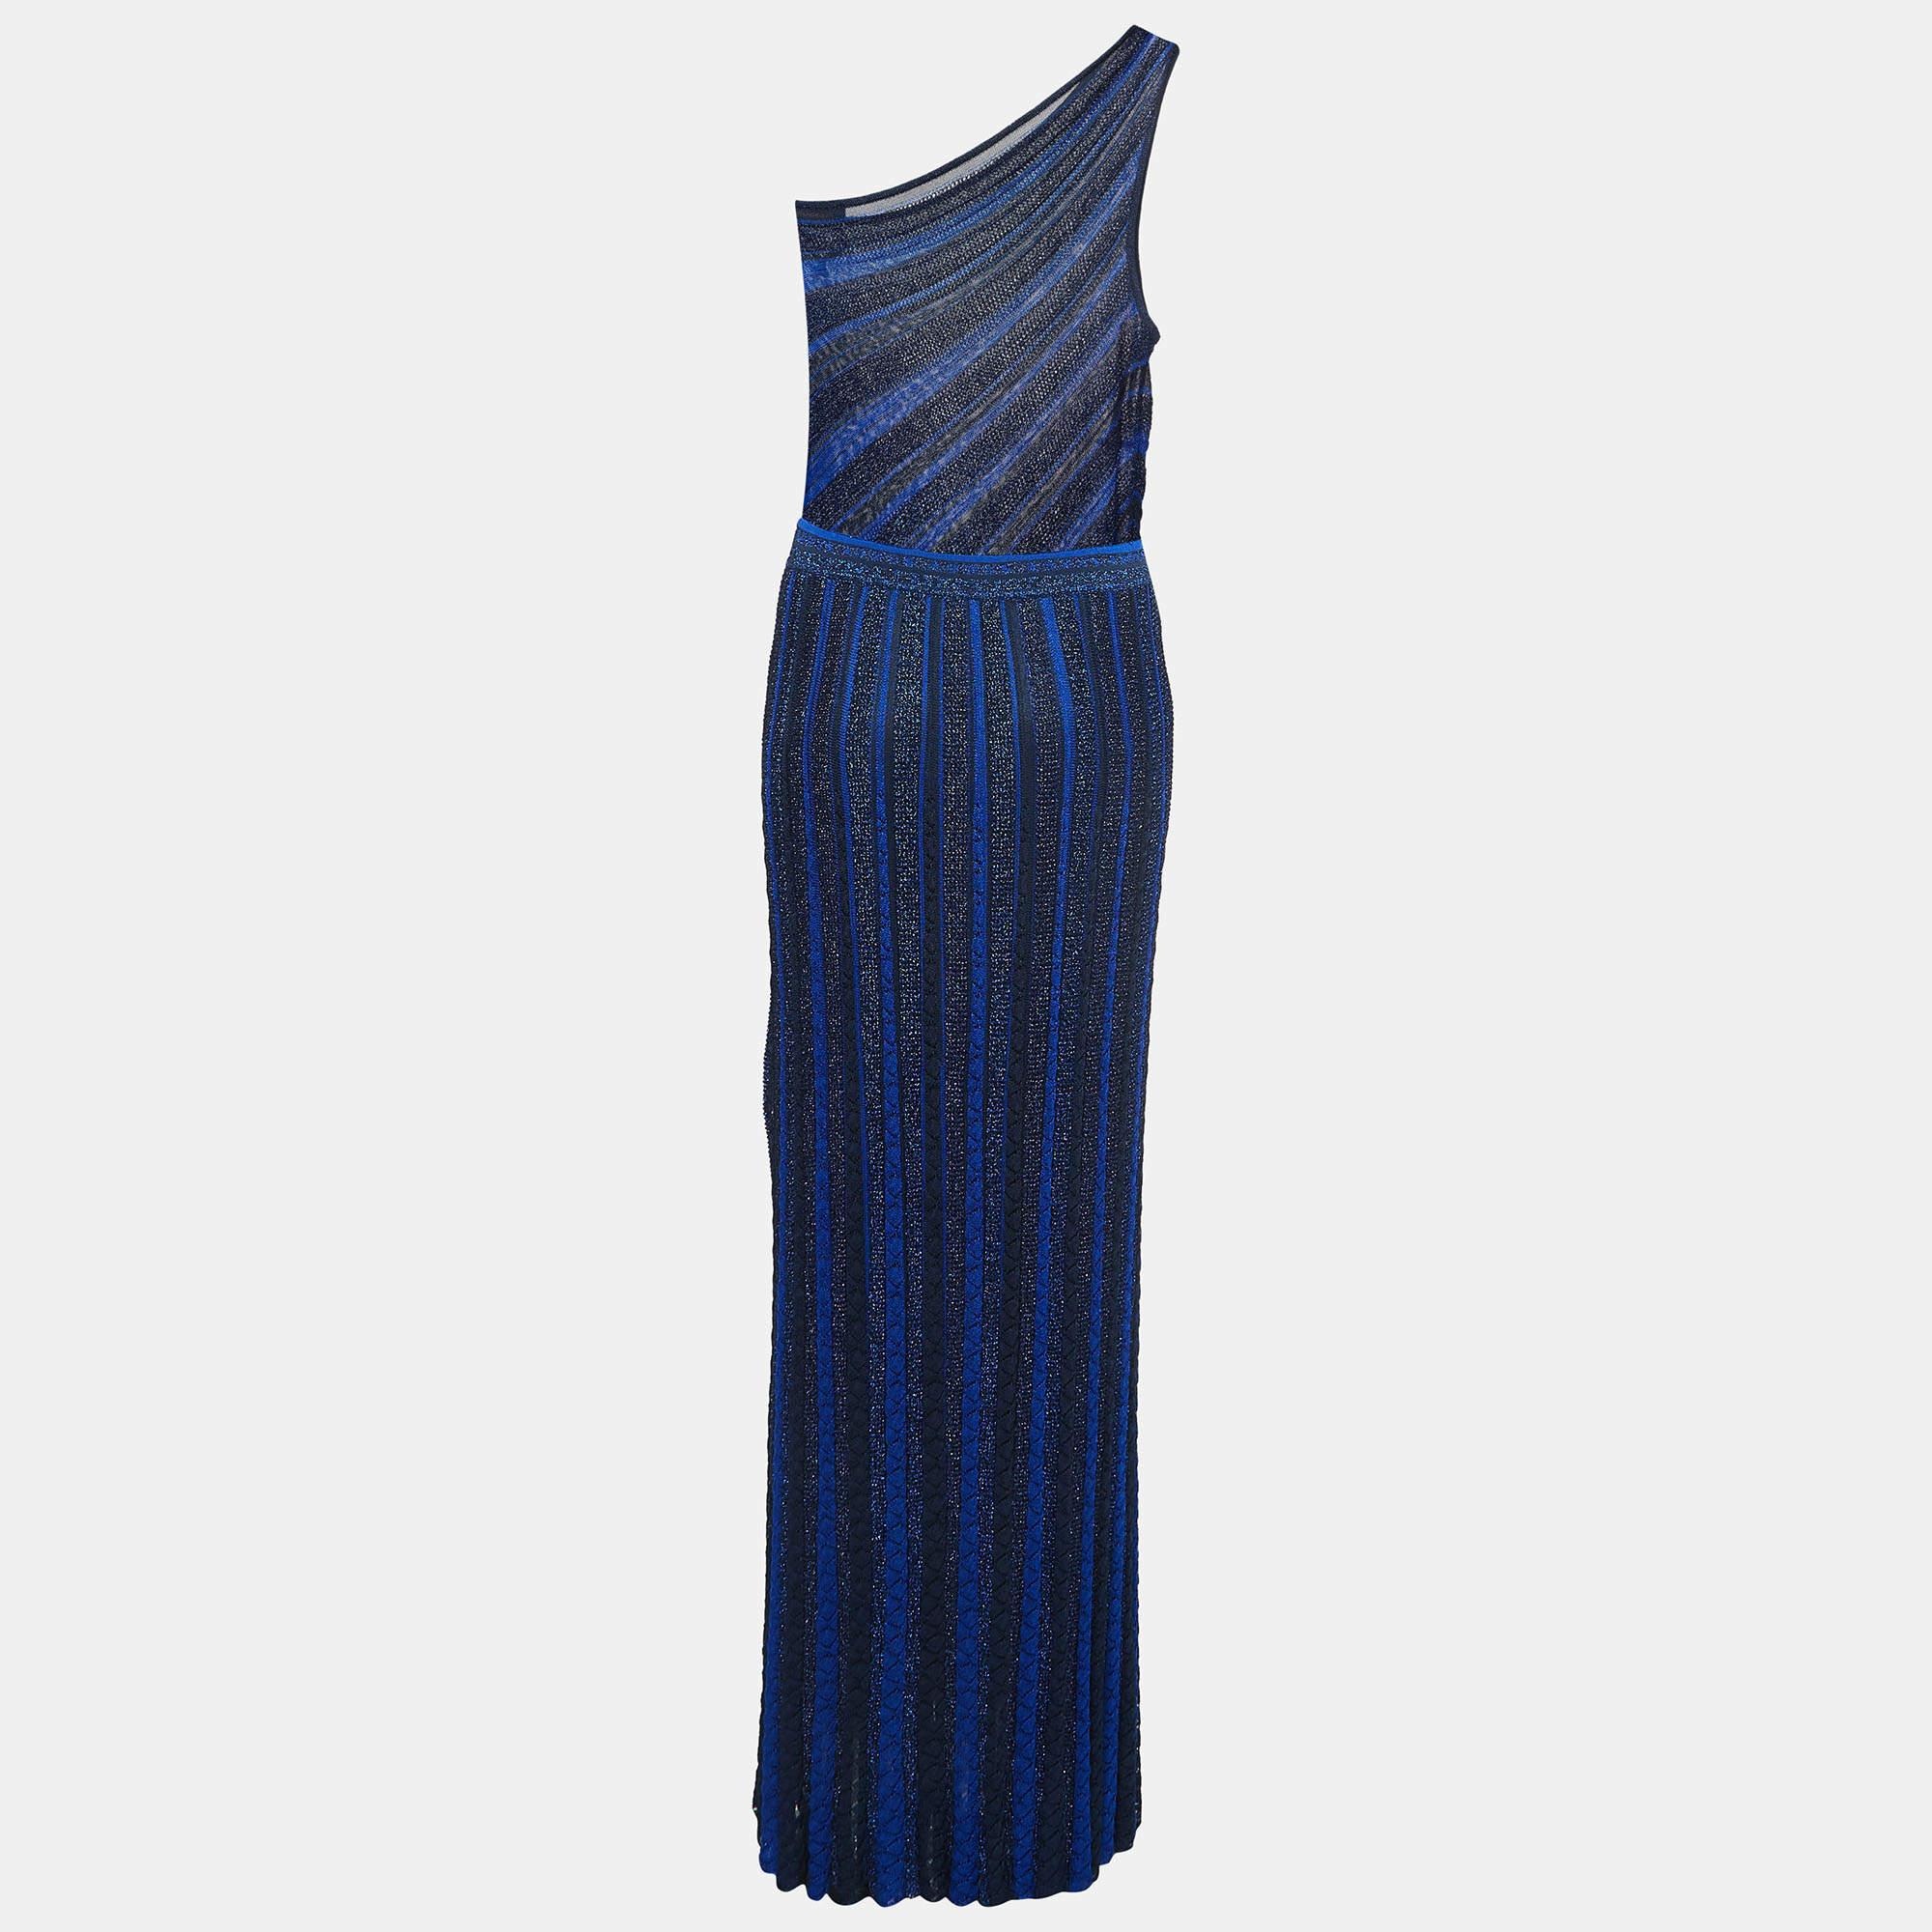 This stylish maxi dress is a fashionable and versatile piece that exudes elegance and comfort. With its long silhouette, it provides a flattering and feminine look. Designed with chic details and unique cuts, it effortlessly combines fashion and